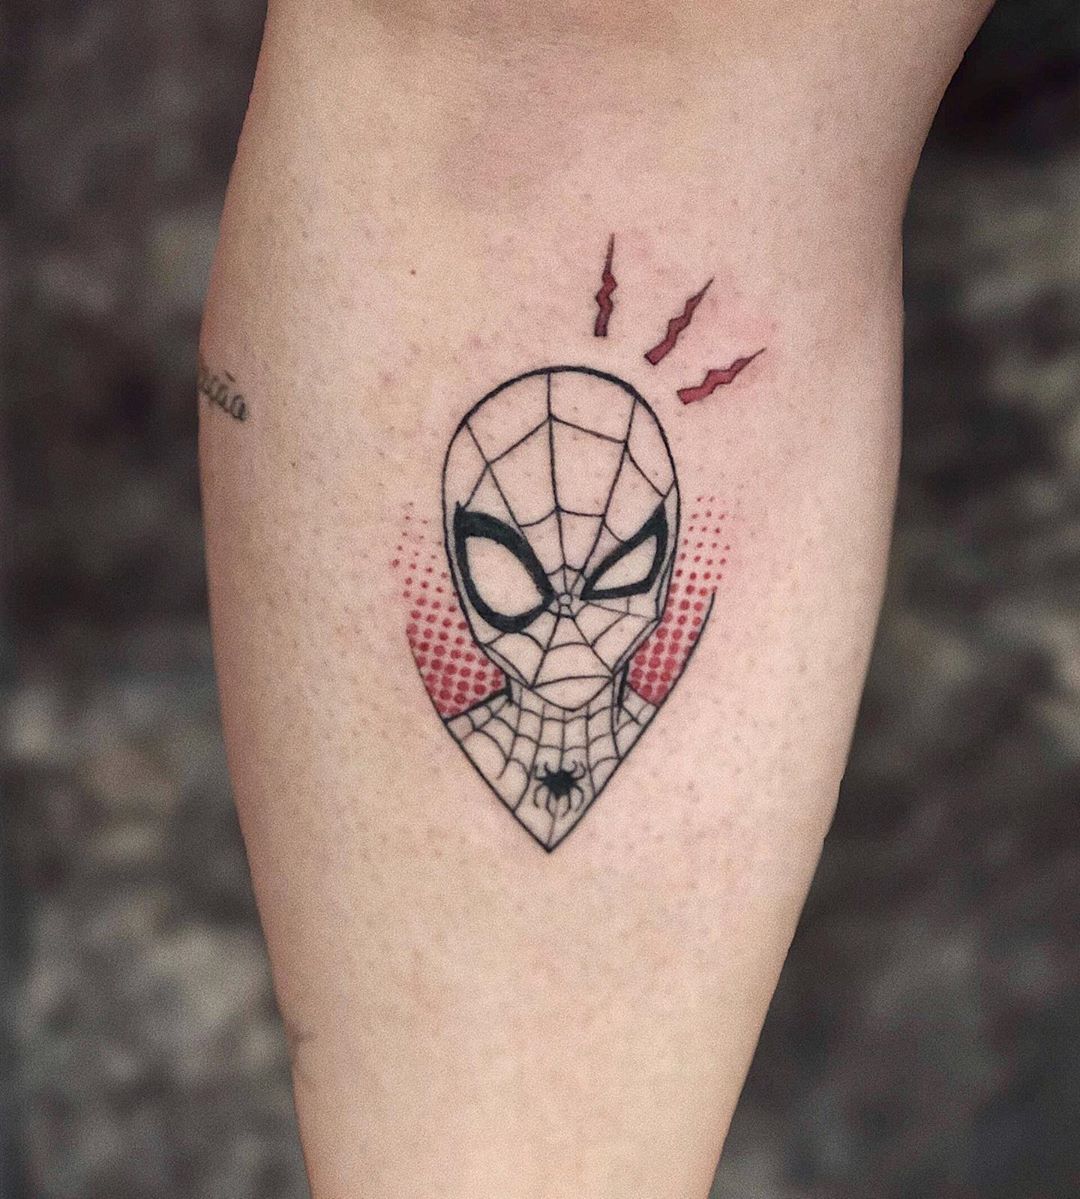 The Garrison Tattoo  Some spidey symbols on brookepatroske15  Which  SpiderMan was your favorite FOR APPOINTMENTS Visit wwwgarrisontattoocom  broketattoos thegarrisontattoo clintontownship tattoo tattoos tattooed  michigantattooer ink 